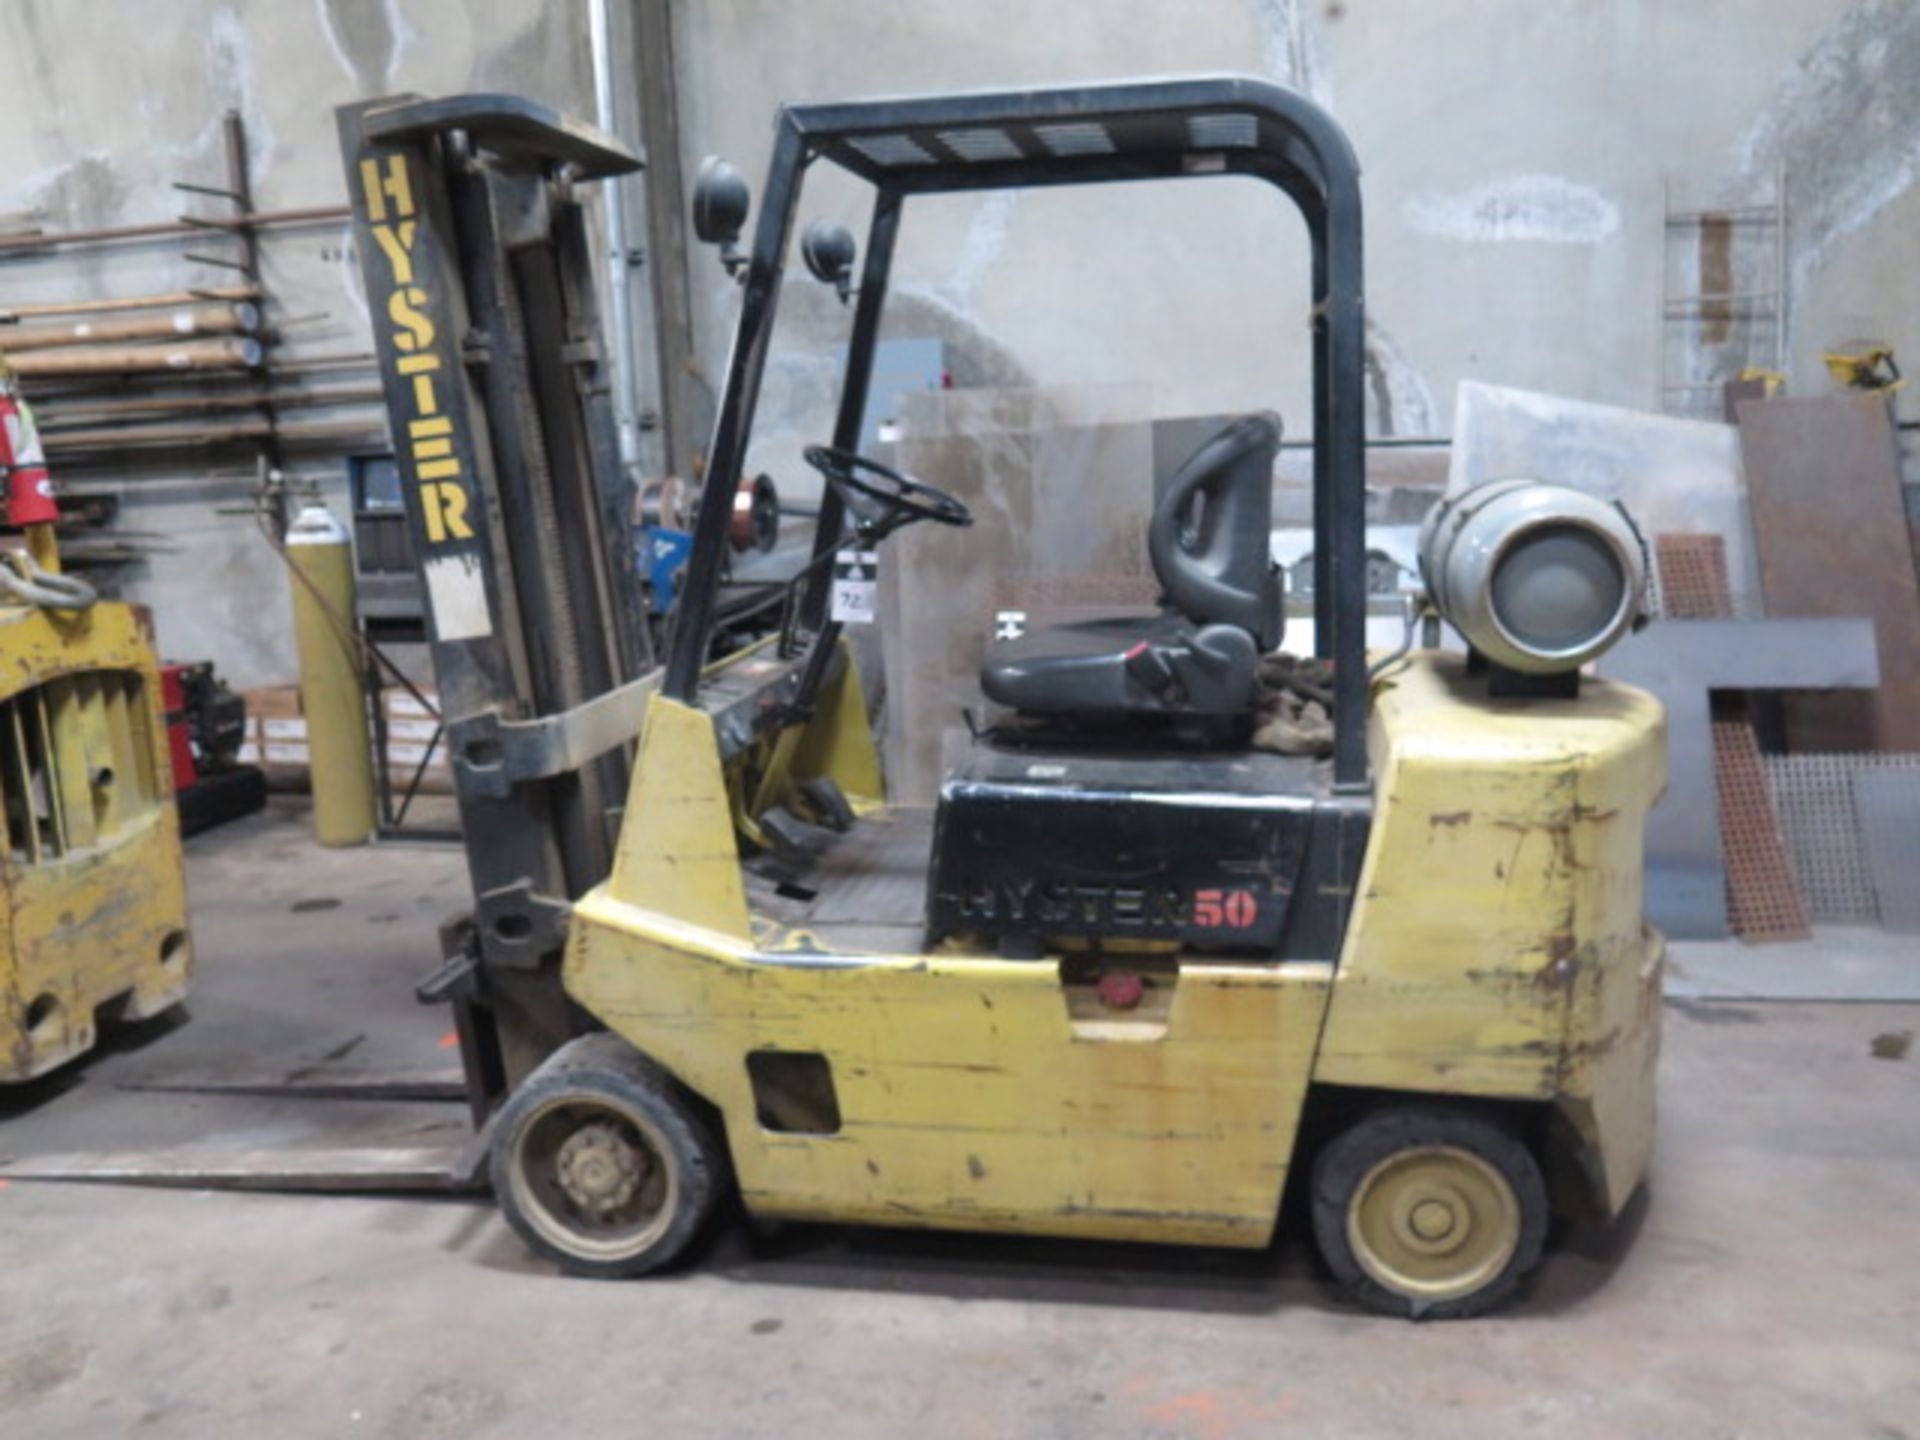 Hyster 50 5000 Lb Cap LPG Forklift w/ 2-Stage Mast, Cushion Tires (SOLD AS-IS - NO WARRANTY)